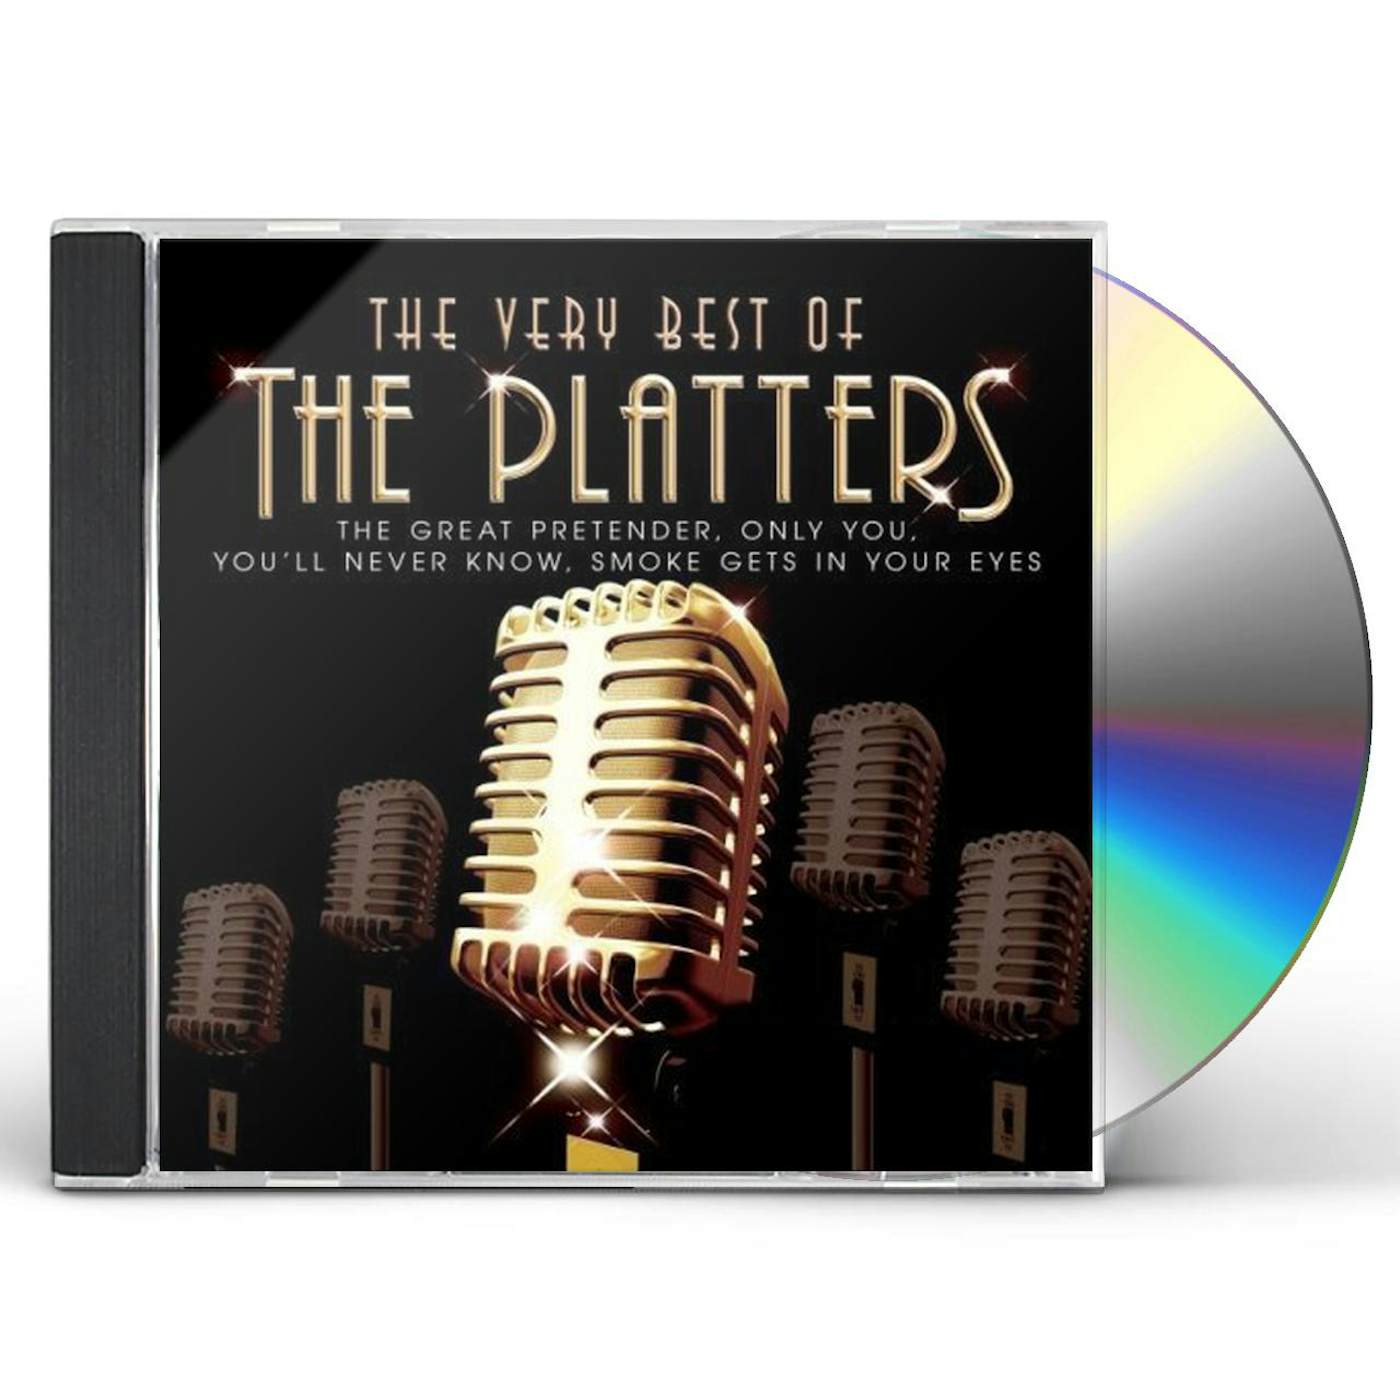 The Platters VERY BEST OF CD